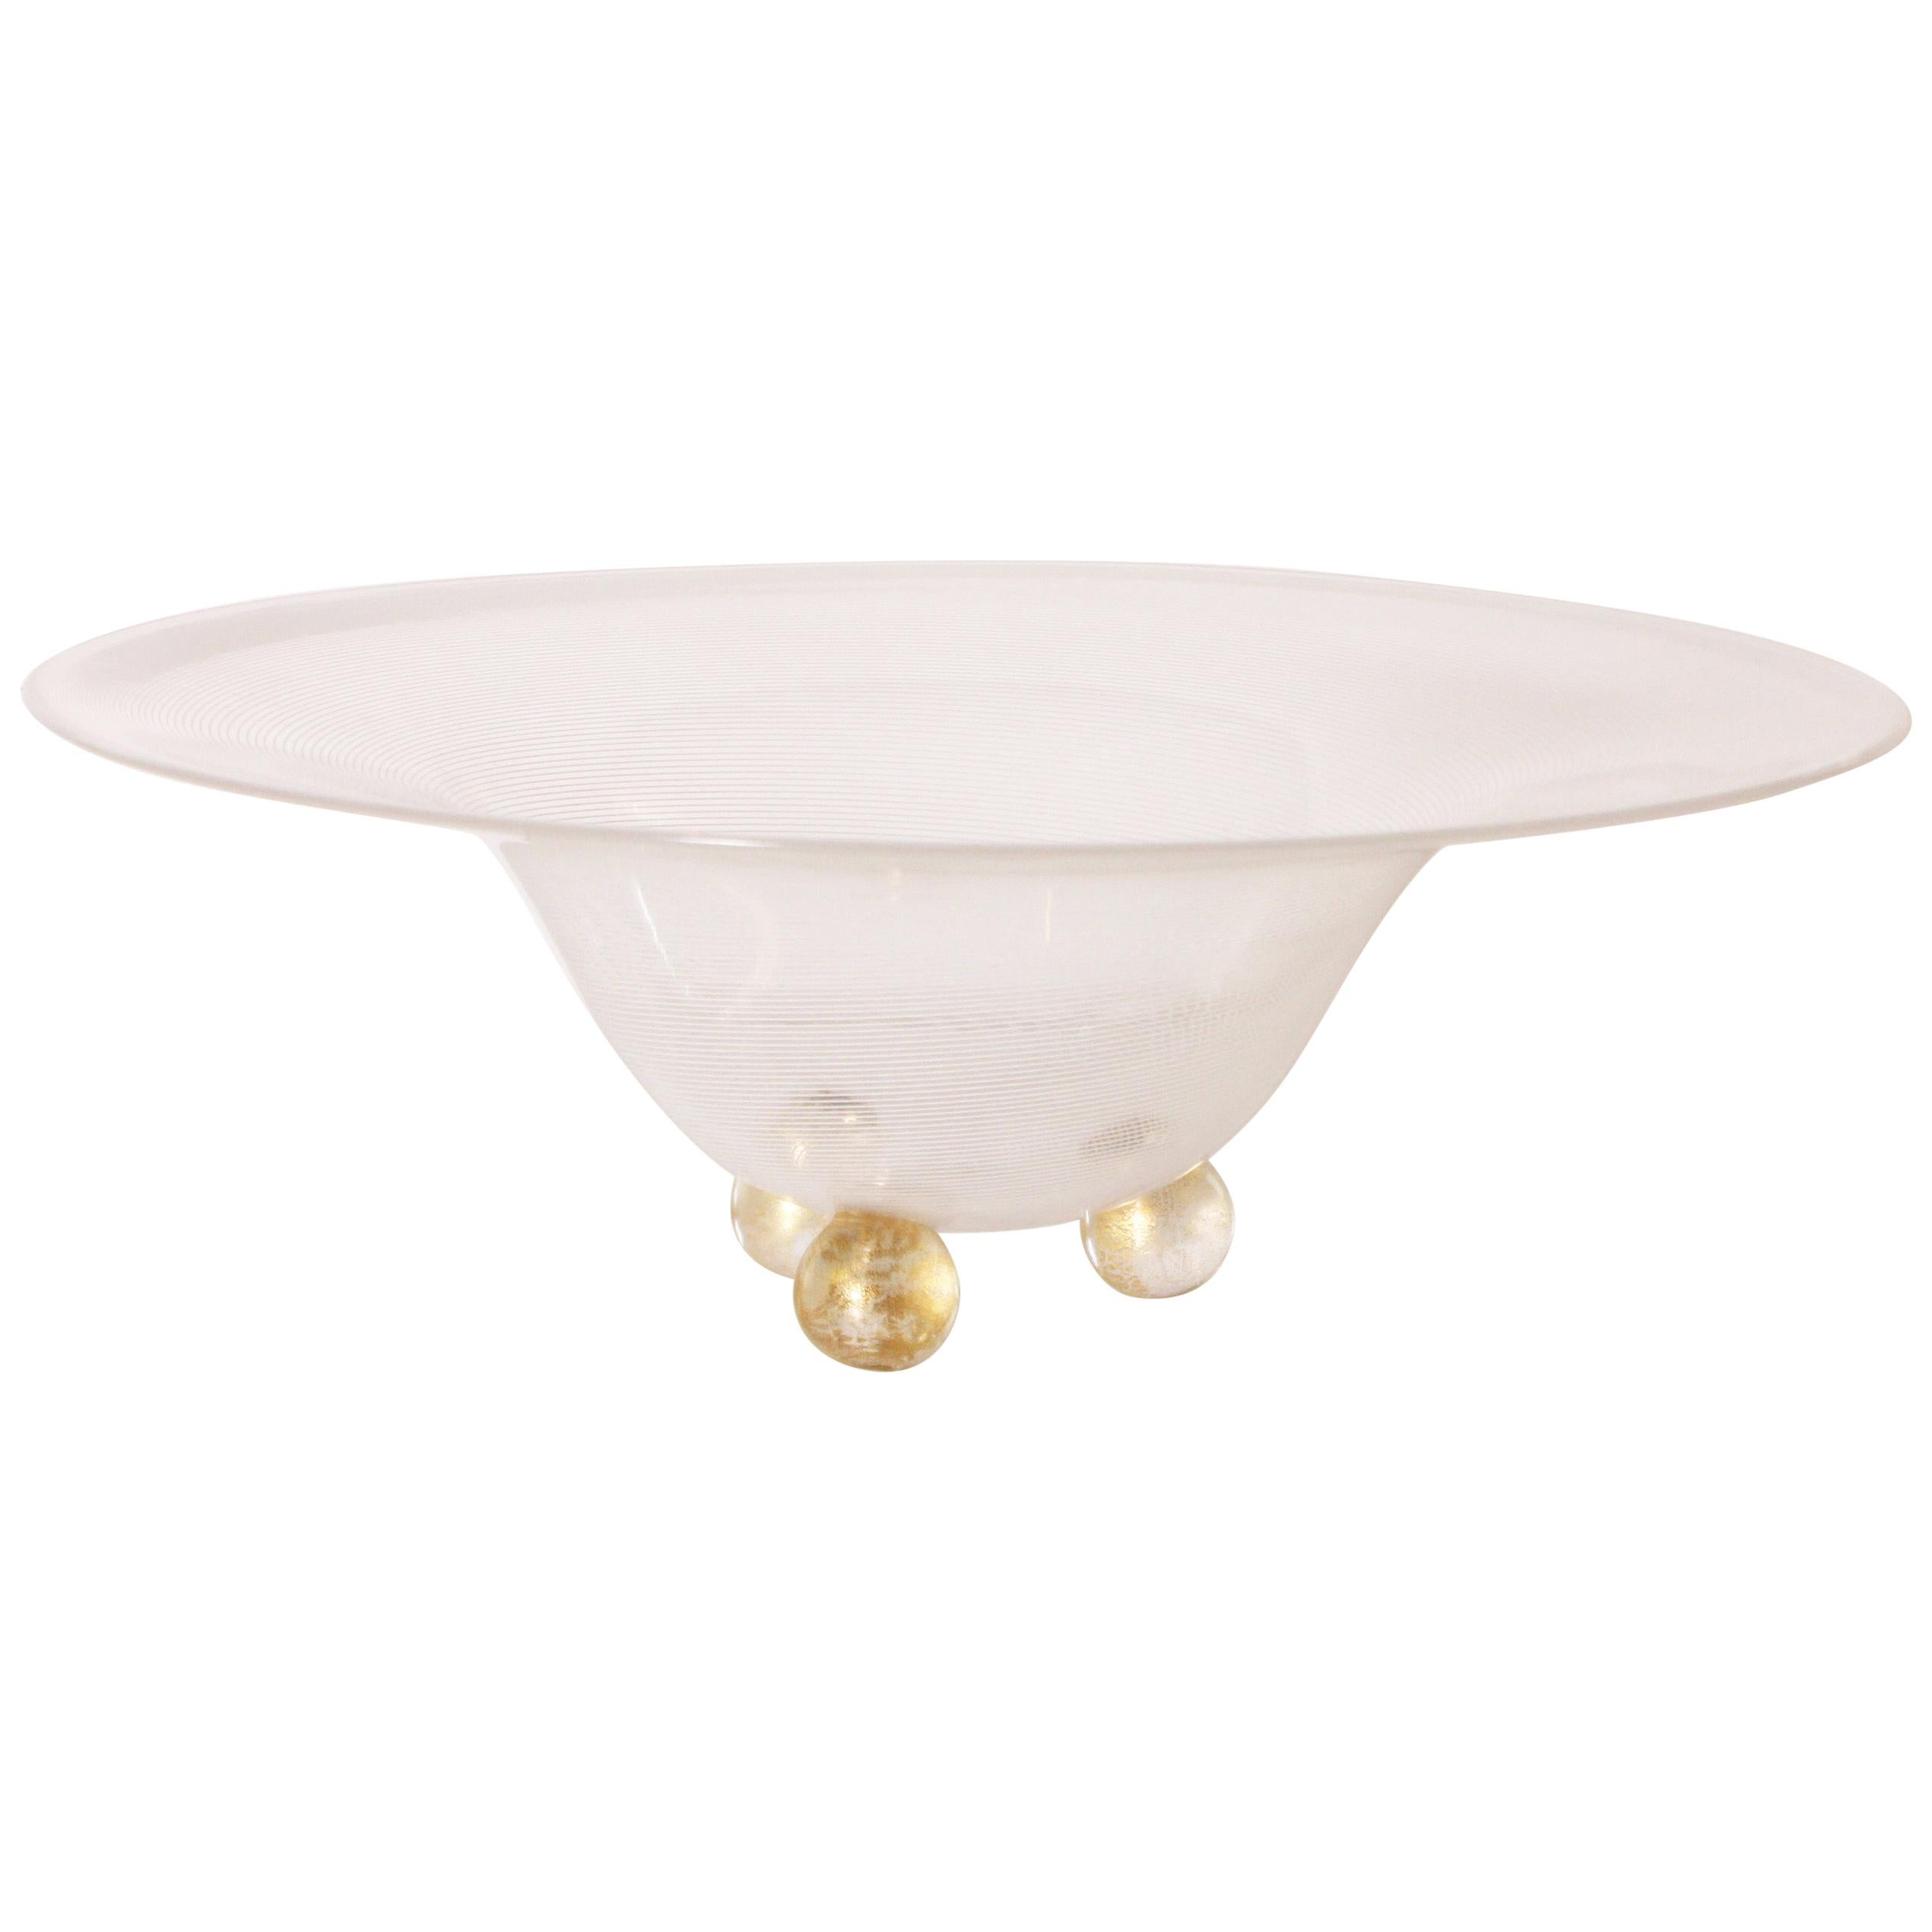 Cenedese Murano Bowl with 22-Karat Gold Inclusions, circa 1950